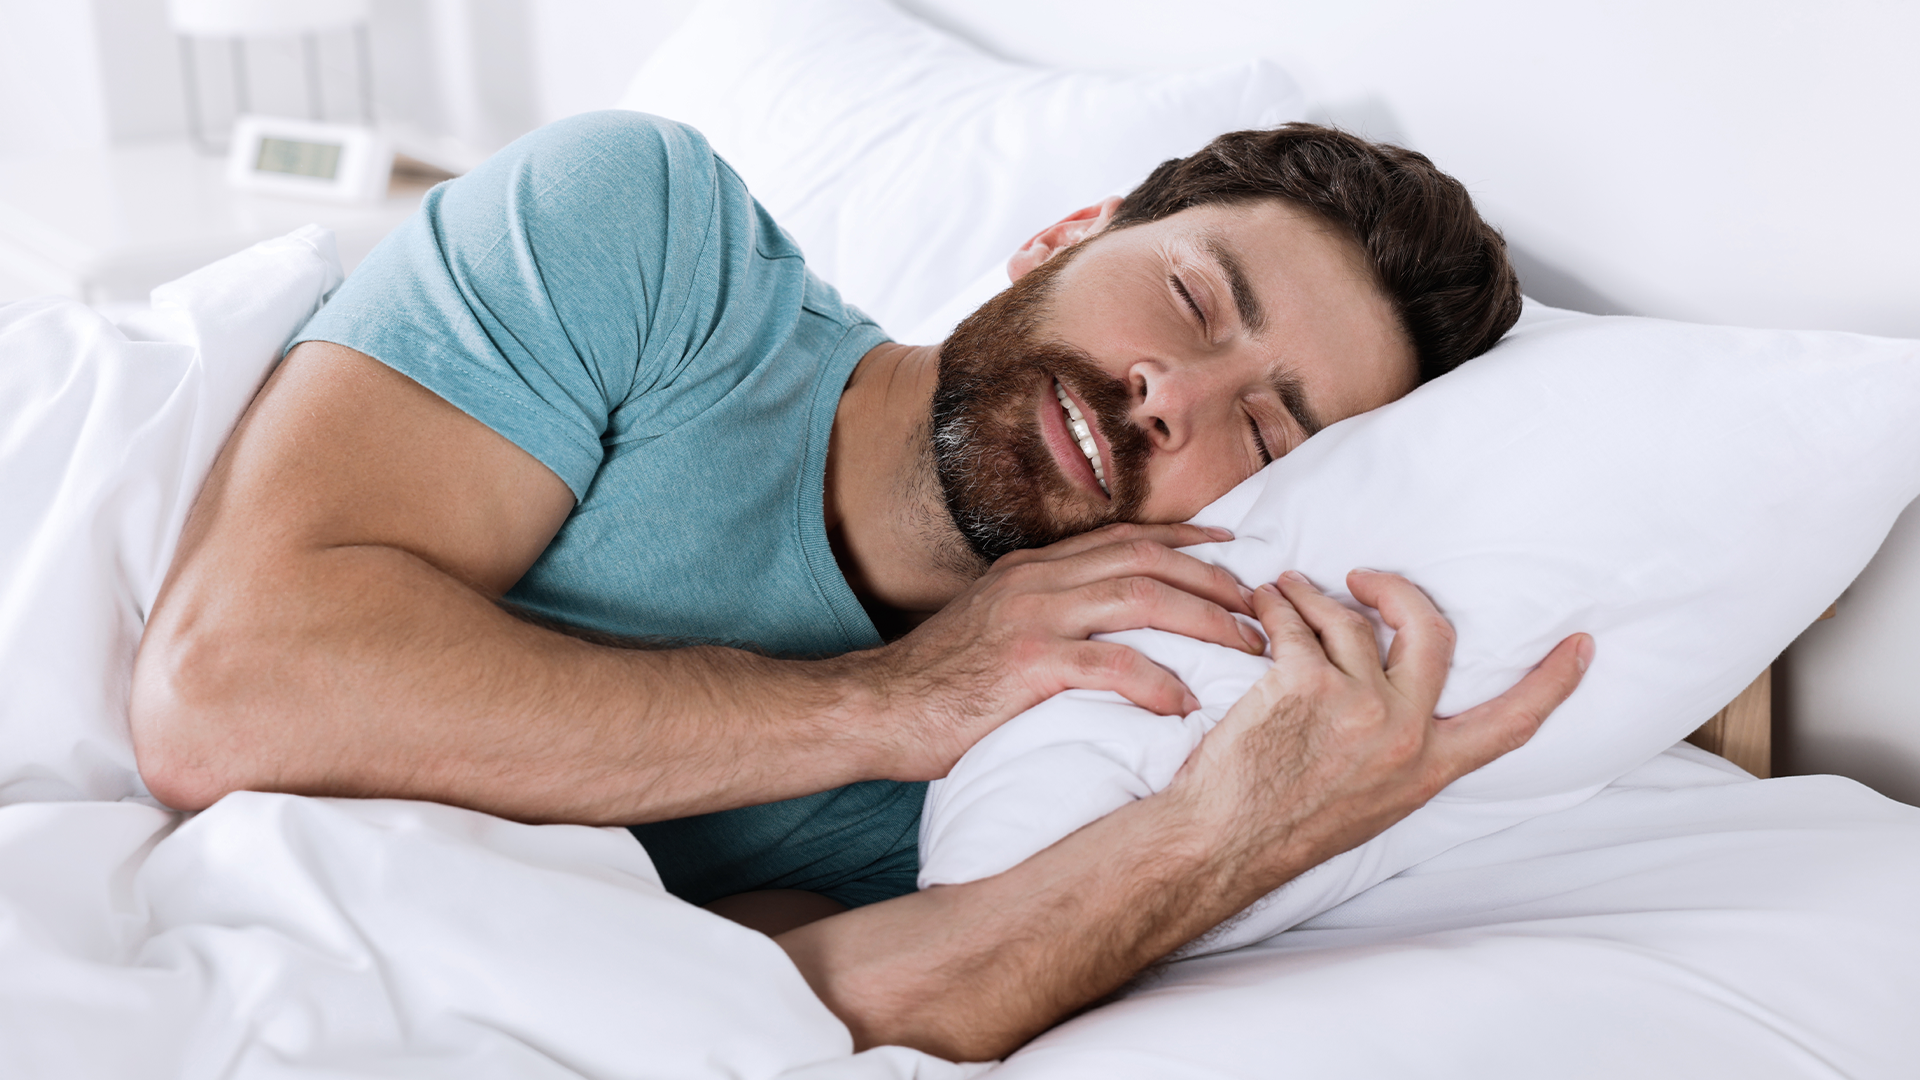 How Does Sleep Affect Your Testosterone?